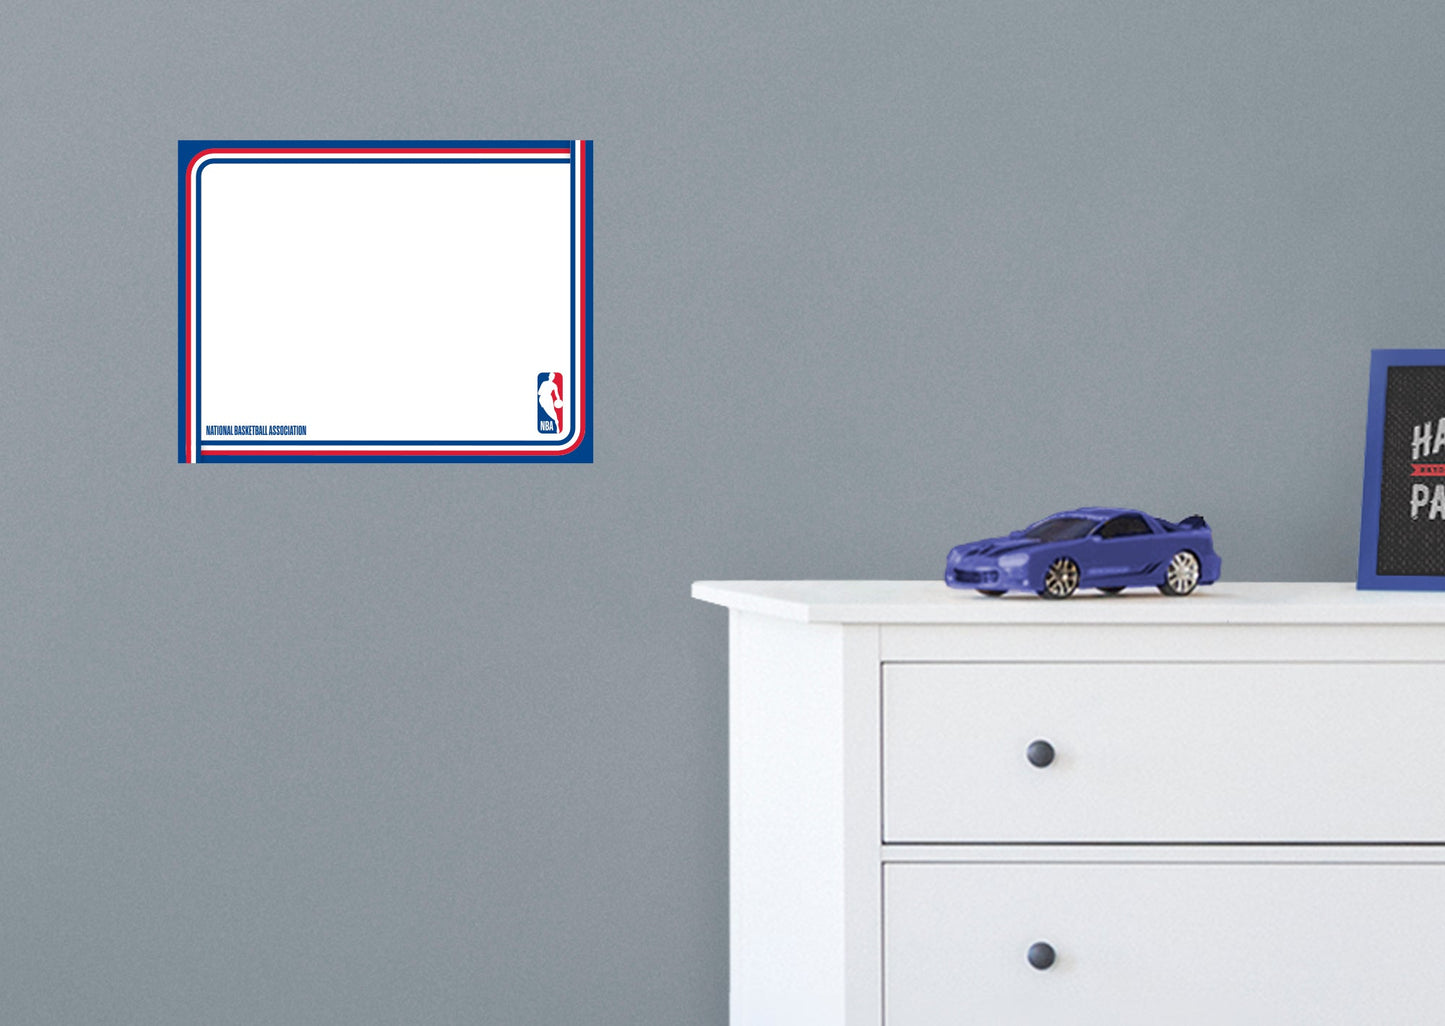 League Branded: Dry Erase Whiteboard - Officially Licensed NBA Removable Adhesive Decal